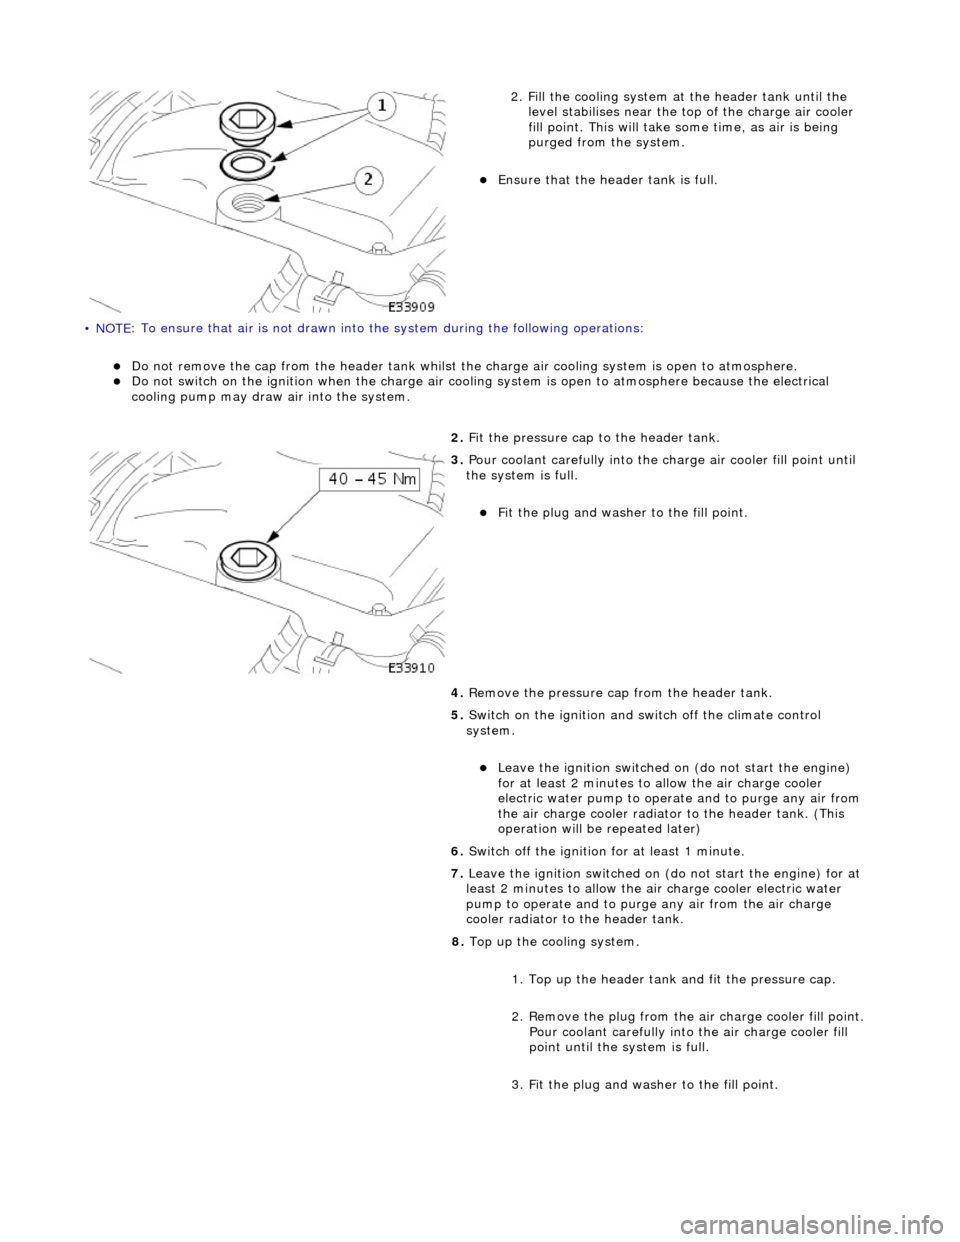 JAGUAR X308 1998 2.G User Guide • NOTE
 : To ensure that
 air is not drawn into the system during the following operations: 
Do
  not remove the cap from the header tank whilst the 
charge air cooling system is open to atmosphe